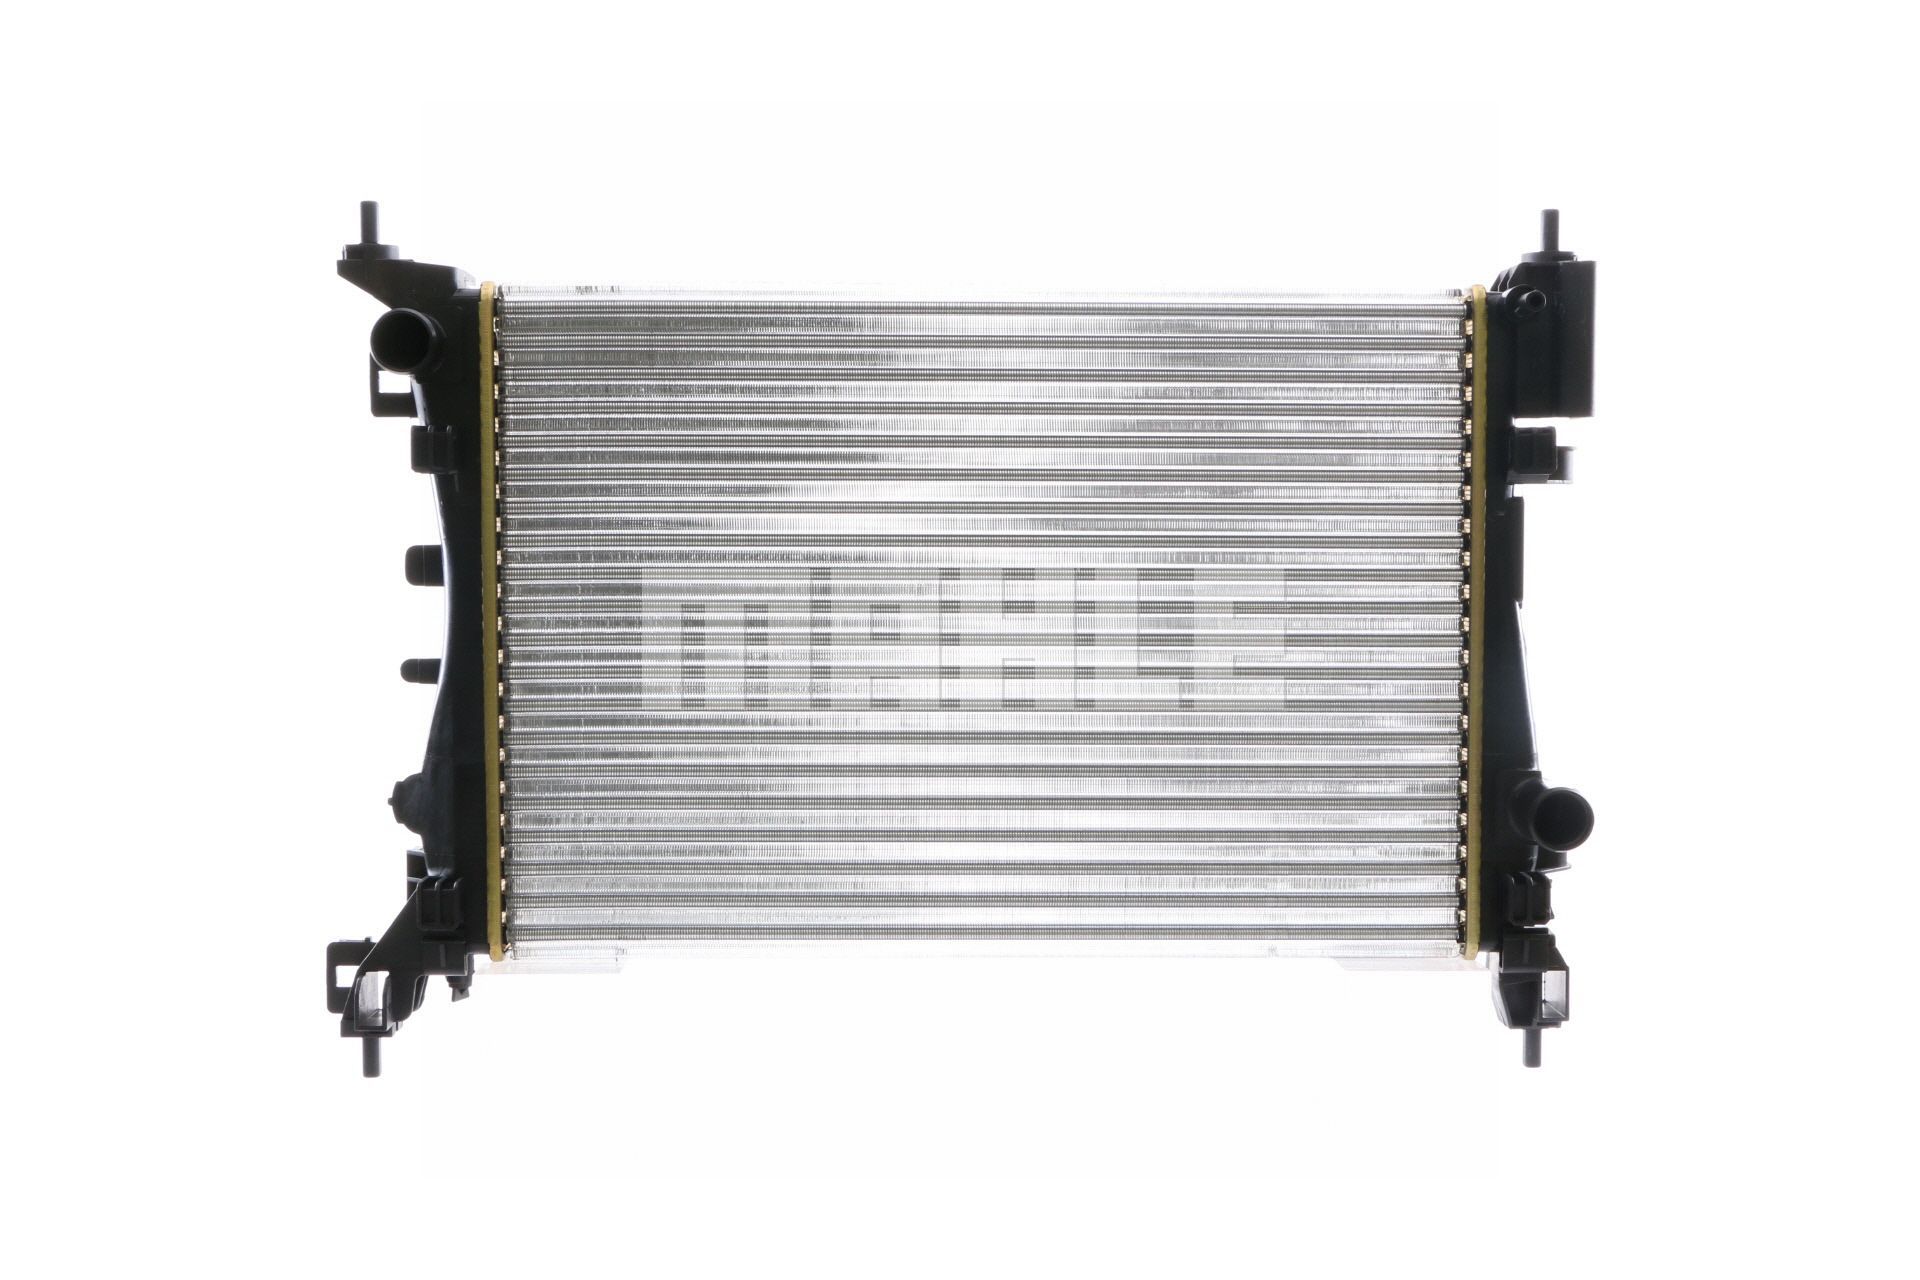 376728784 MAHLE ORIGINAL for vehicles with/without air conditioning, 540 x 378 x 23 mm, with bolts/screws, Automatic Transmission, Manual Transmission, Mechanically jointed cooling fins Radiator CR 773 000S buy